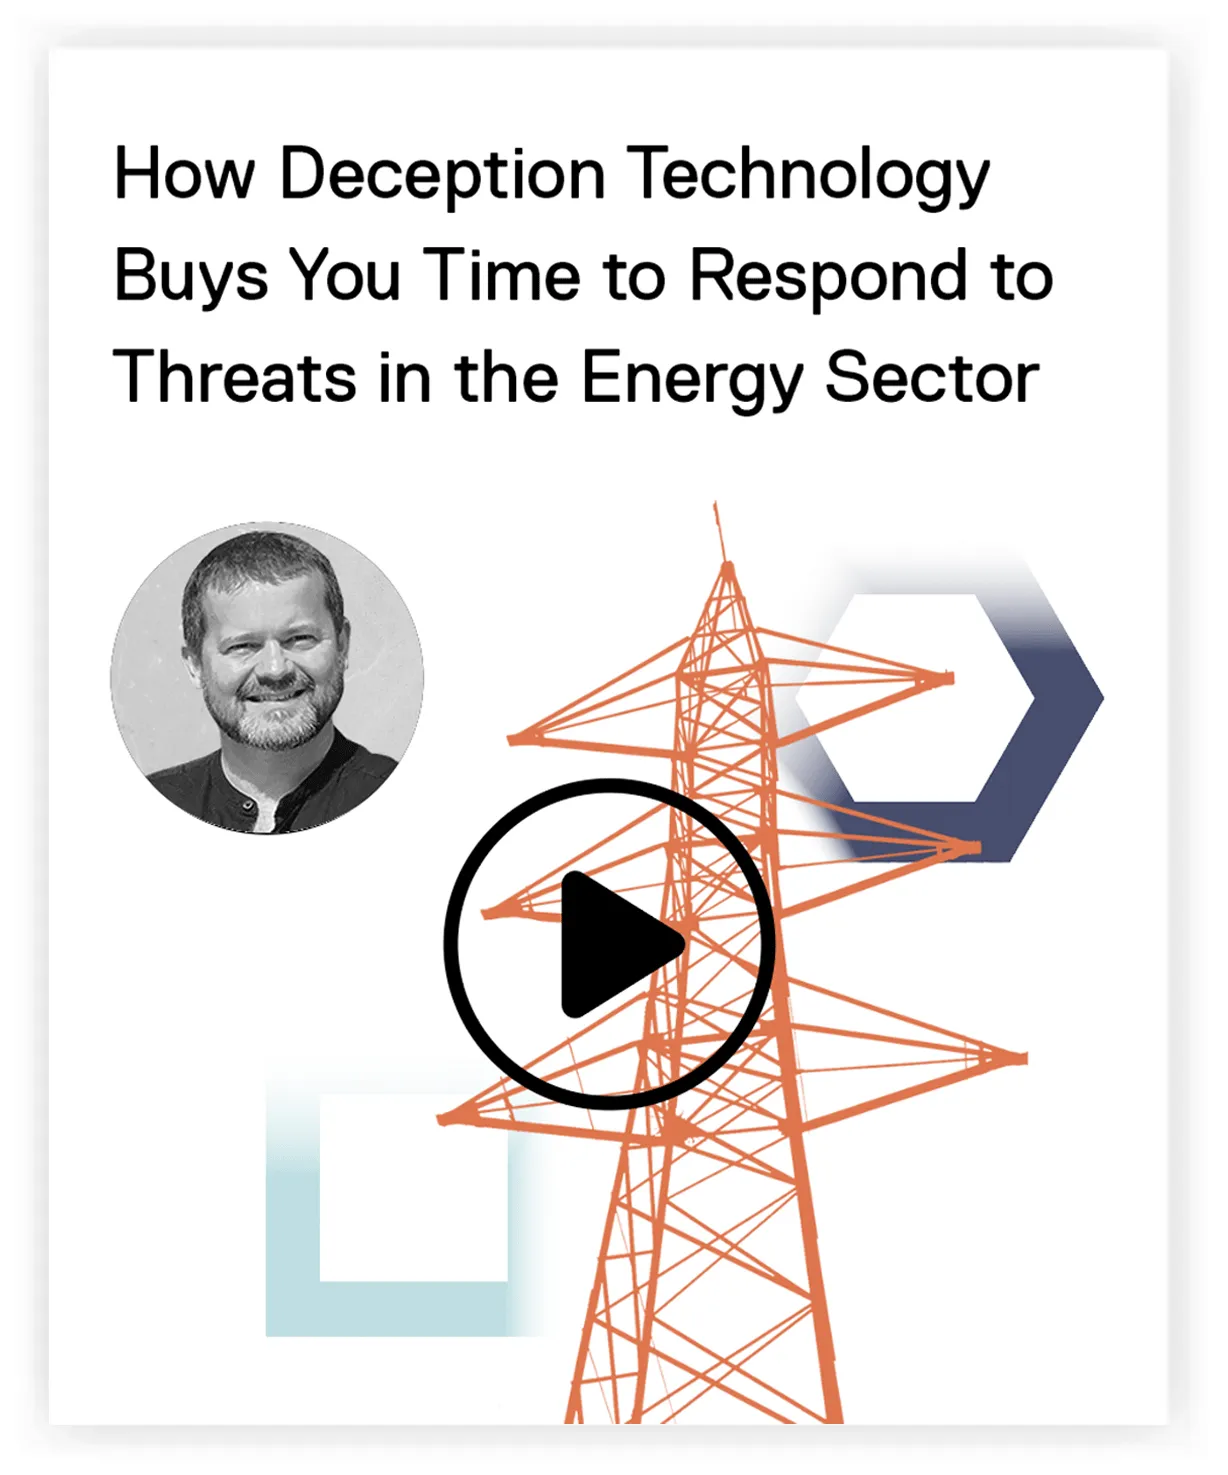 How deception technology buys you time to respond to threats in the energy sector?